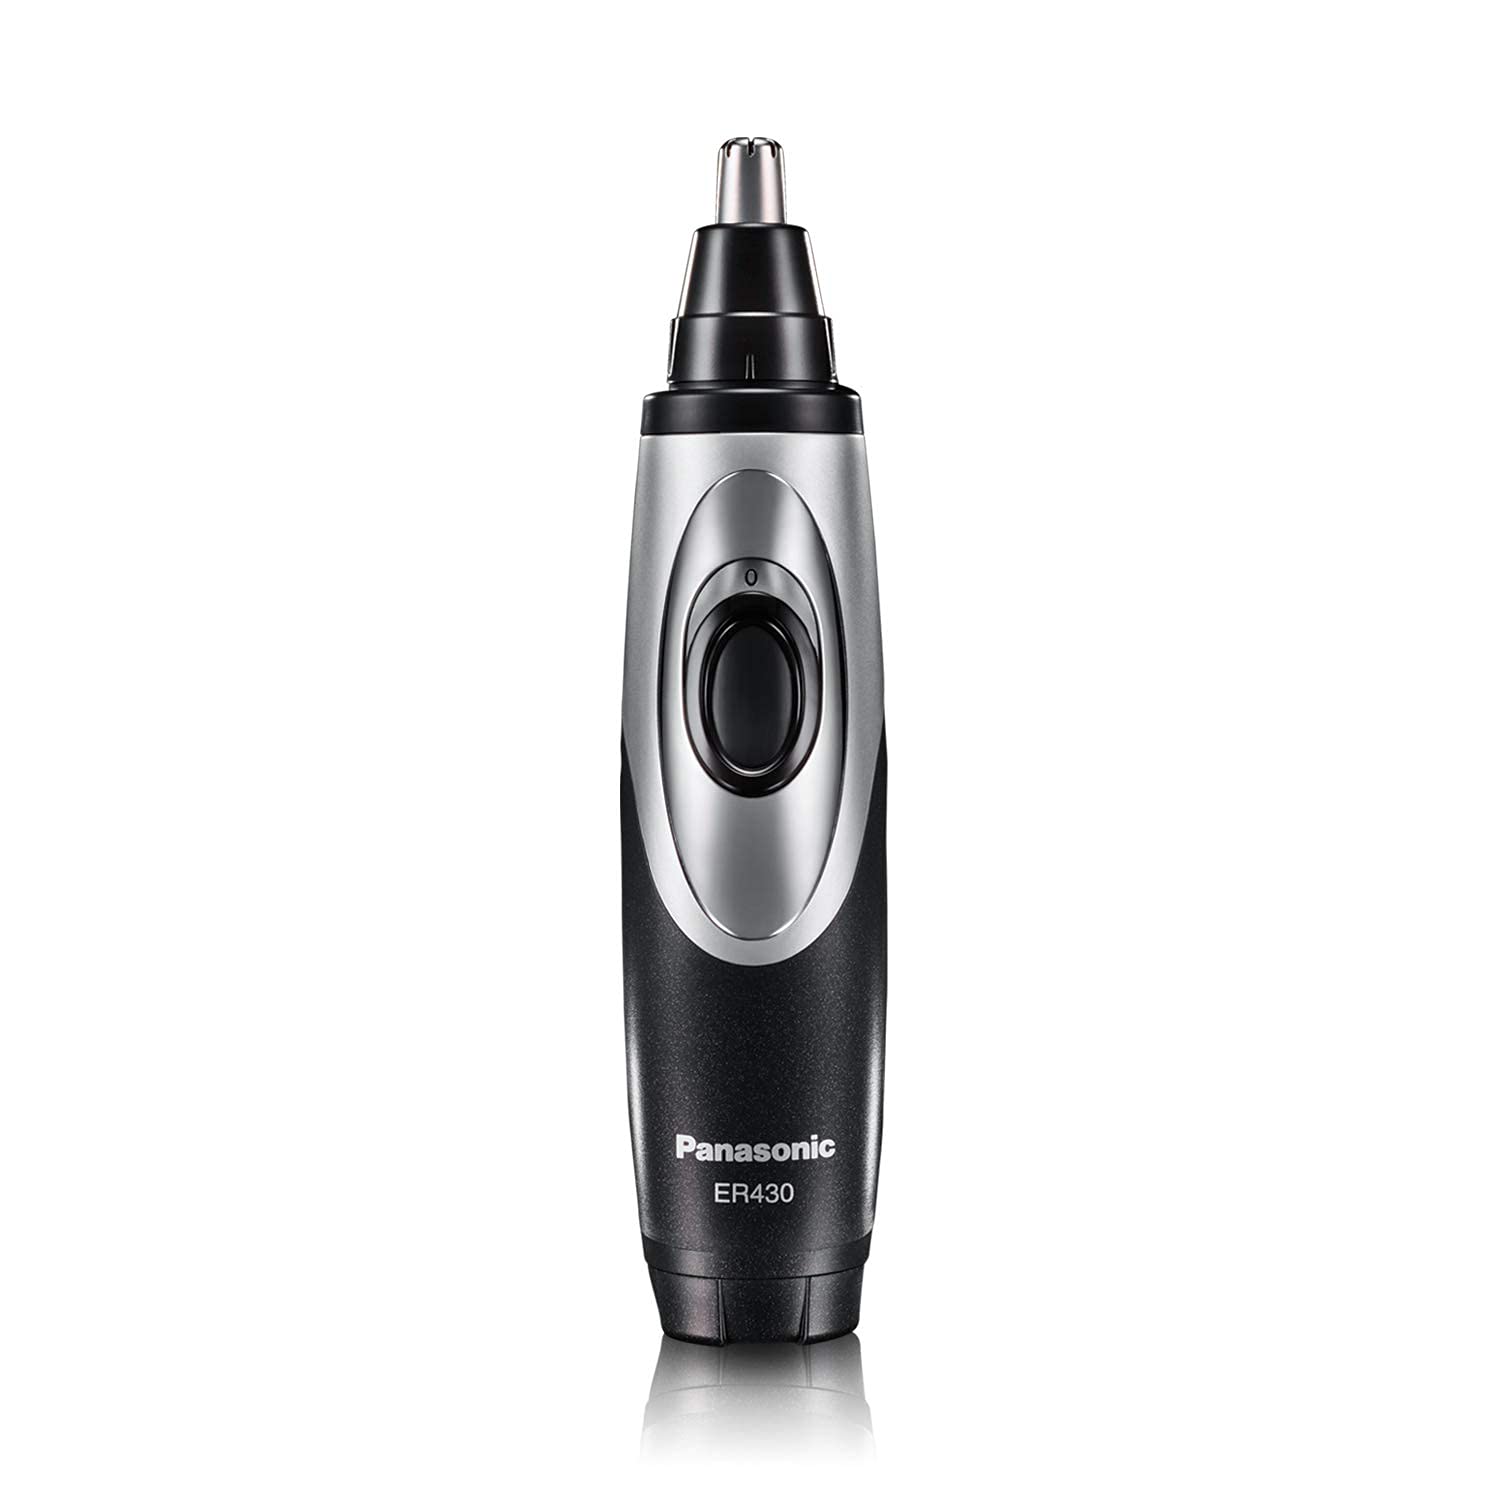 Review of Panasonic ER430K Nose, Ear and Facial Hair Trimmer Wet/Dry with Vacuum Cleaning System